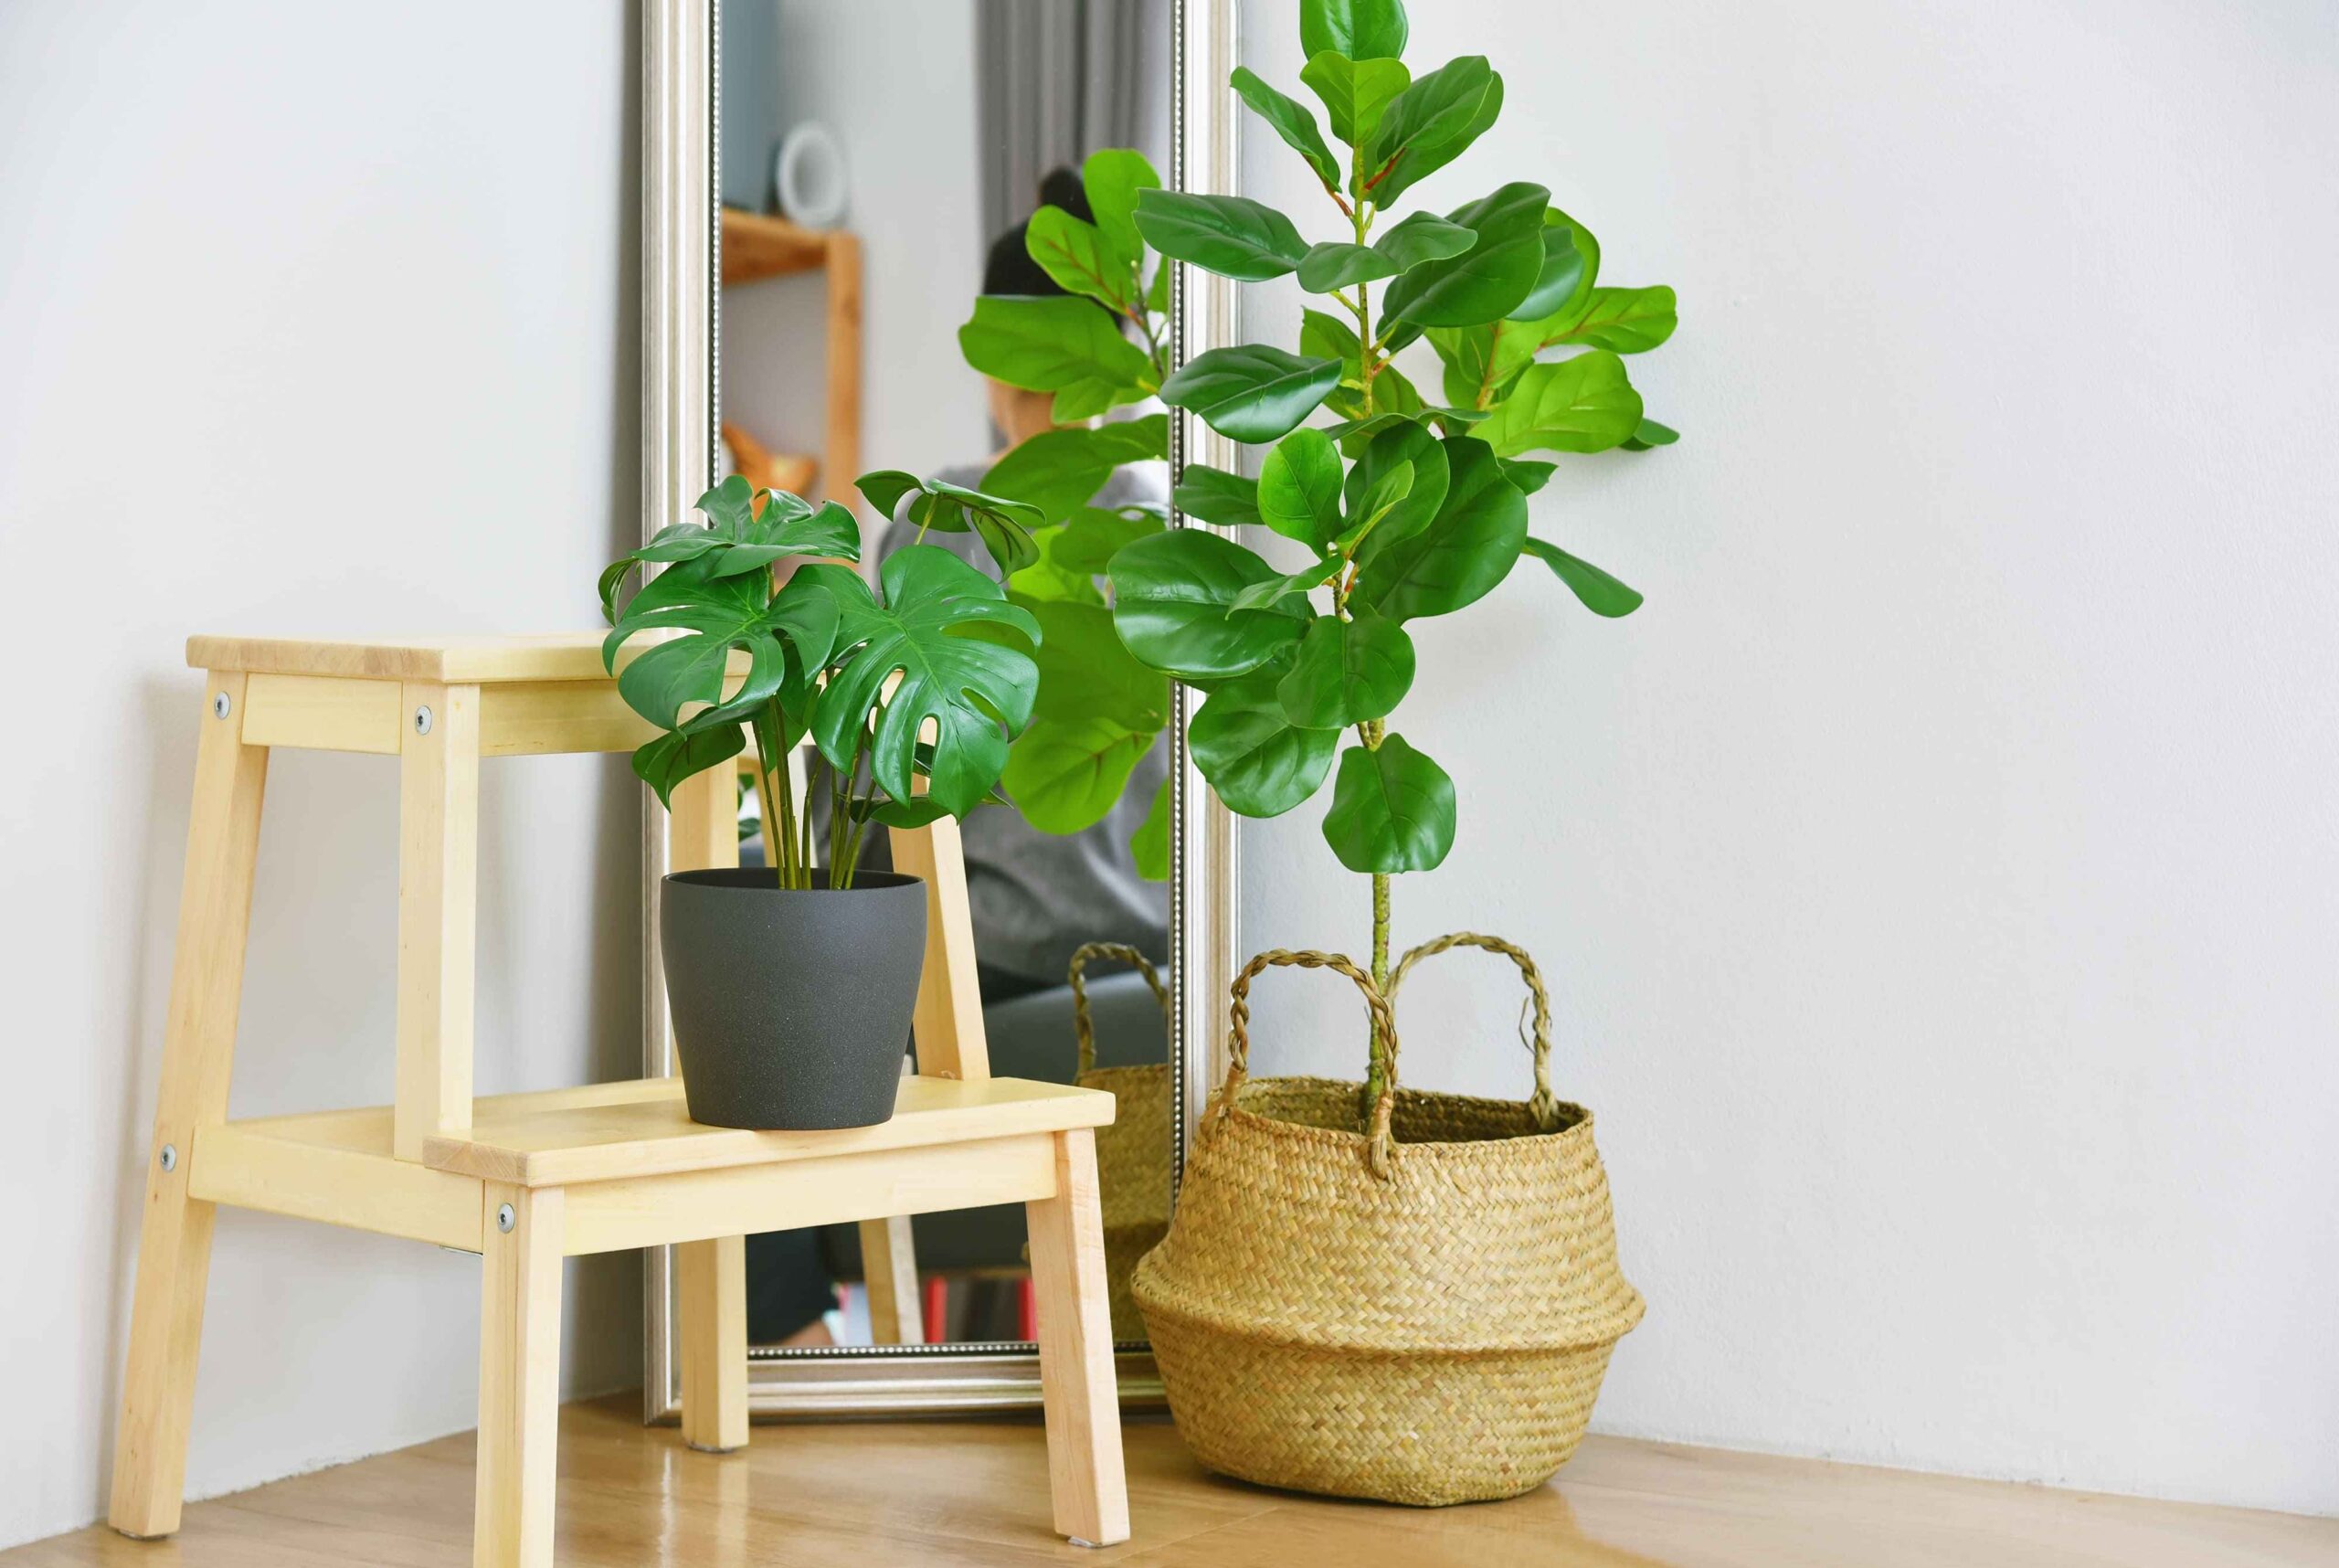 4 ideas for choosing the right plants for condo residents with a green heart